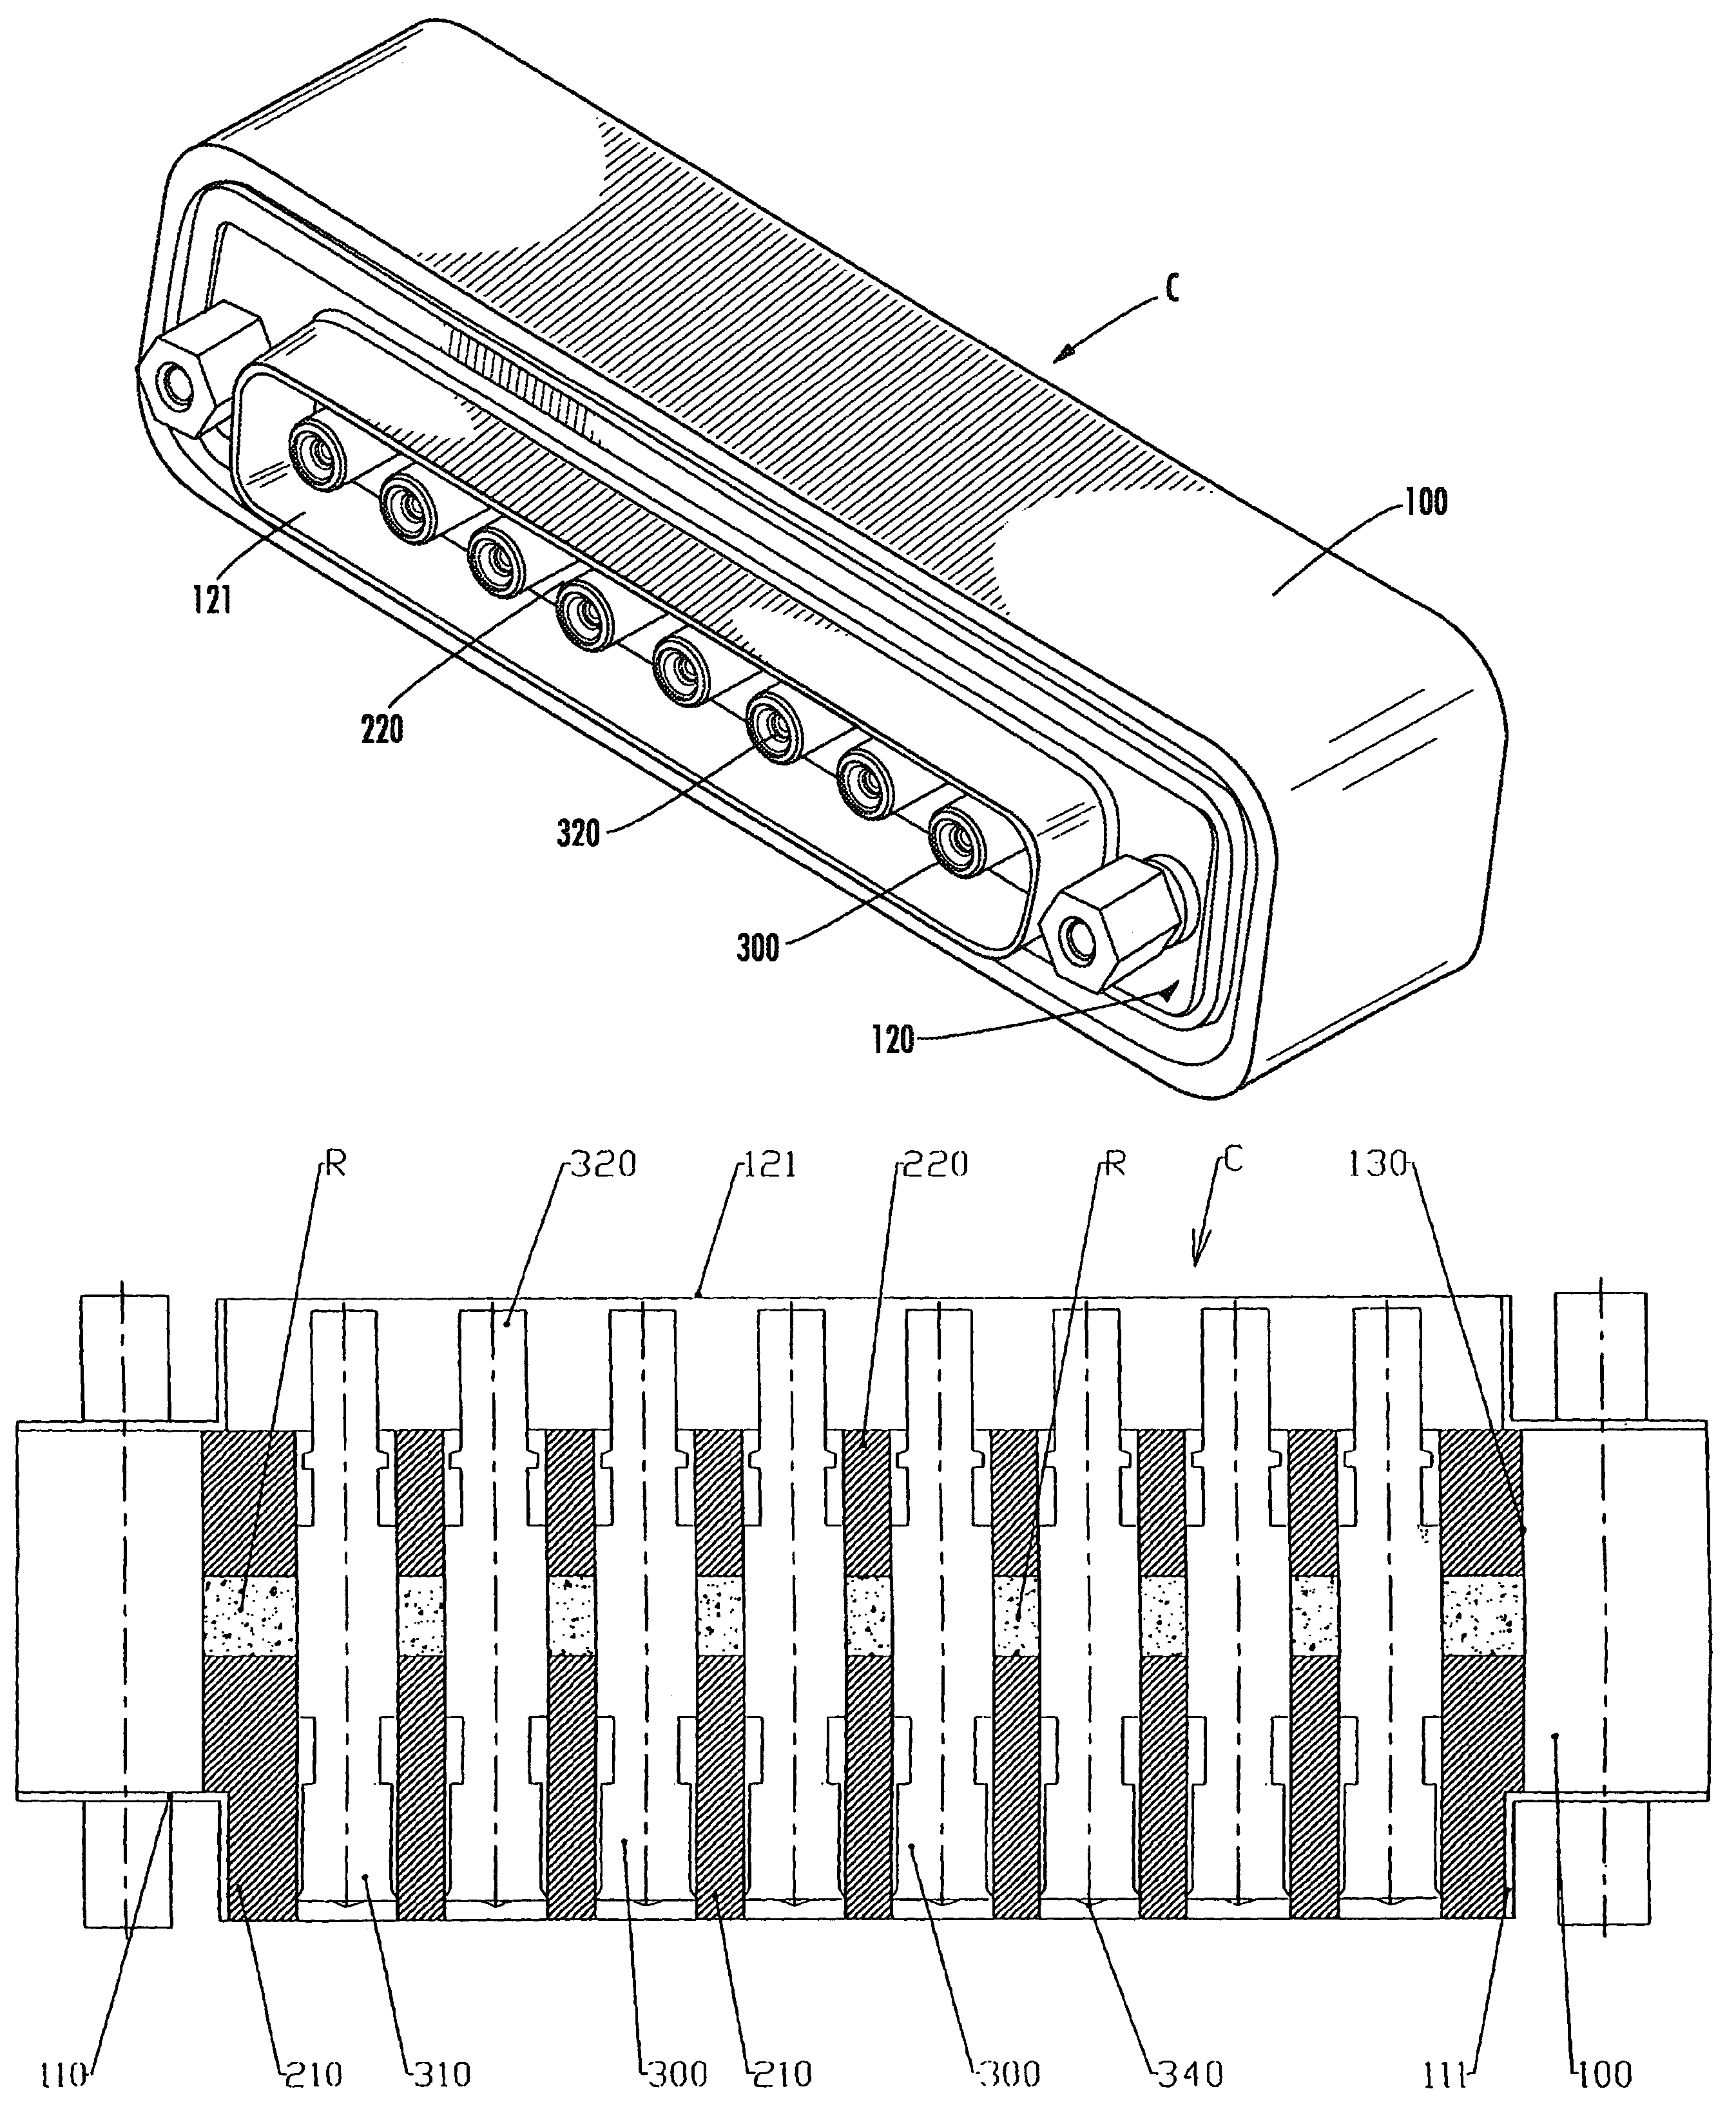 Method for sealing partition bushing connector coaxial contacts, adapted coaxial contact and resulting connector